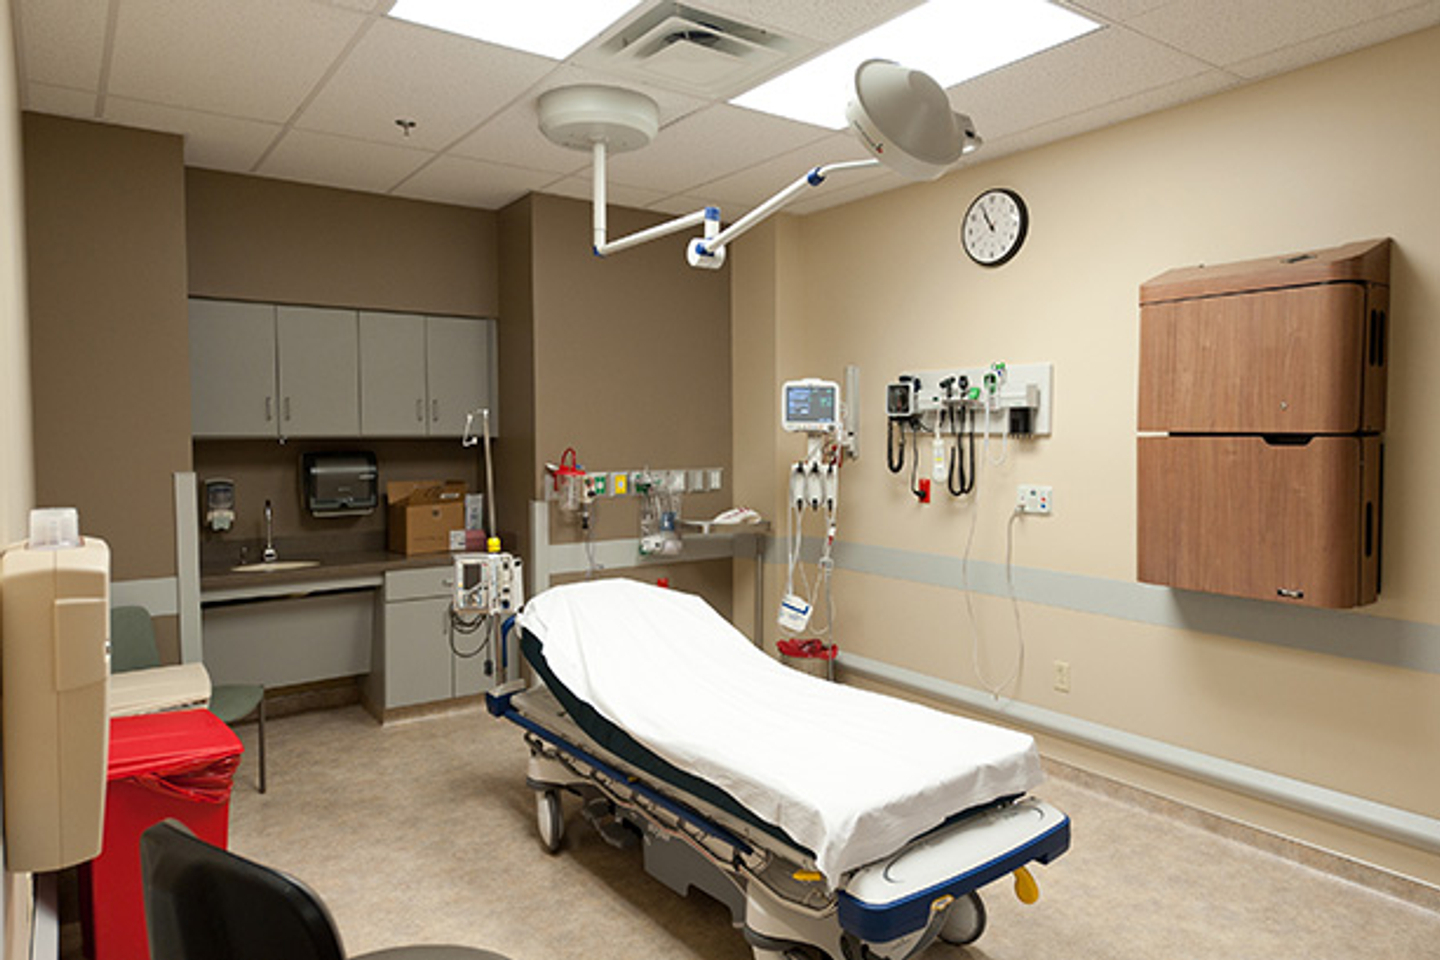 A closer view inside an unoccupied emergency room bed, where a sink, cabinetry and medical equipment are on display.